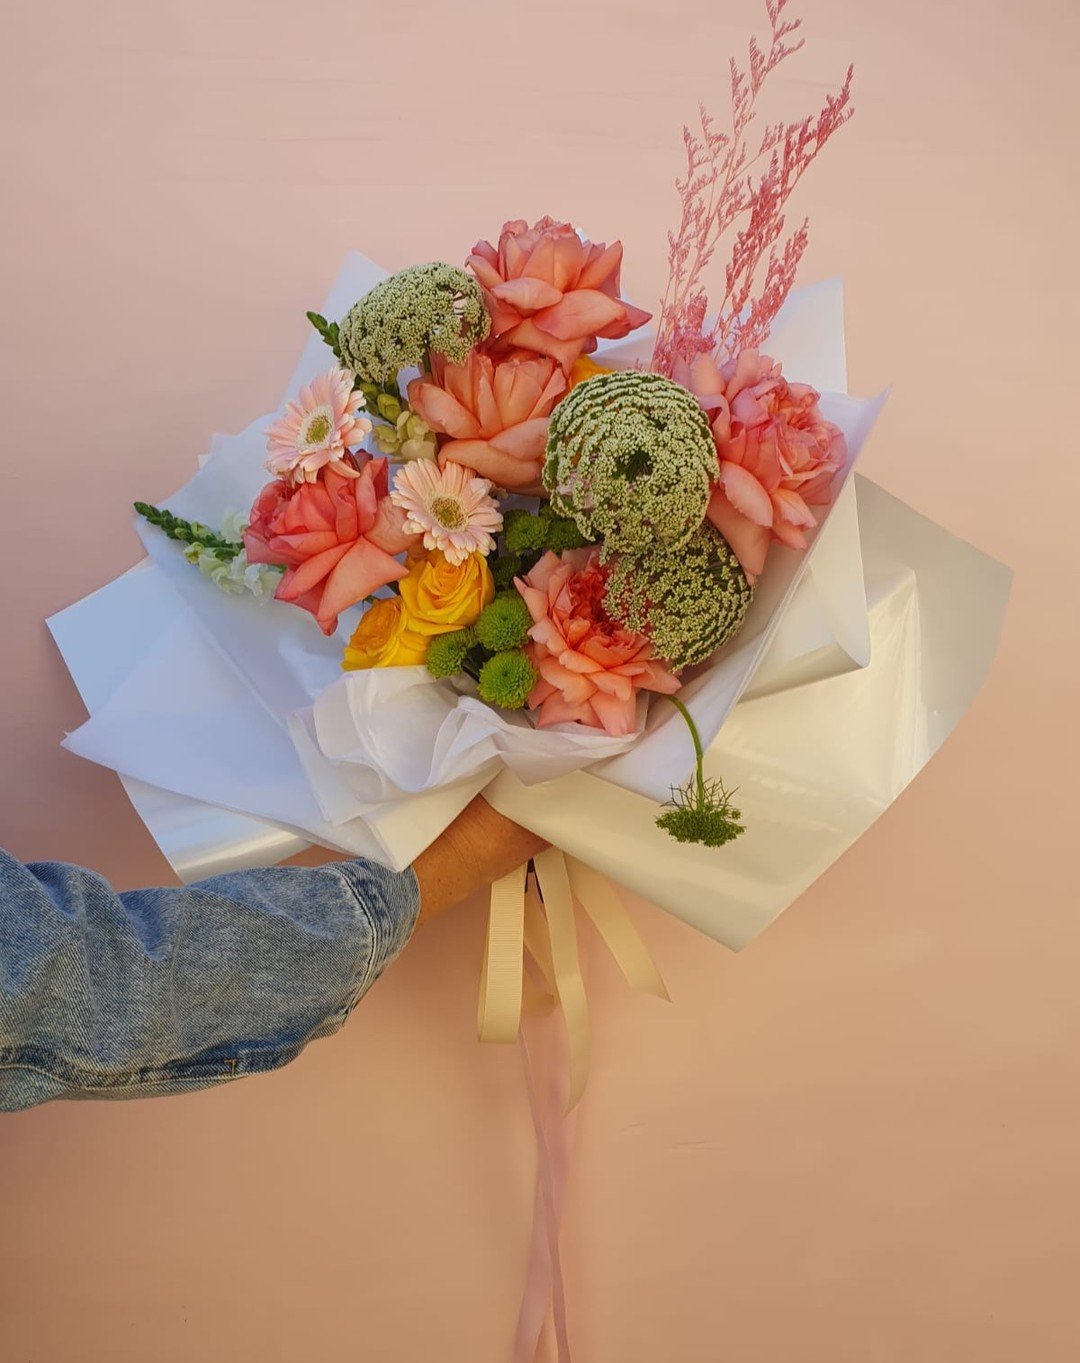 💐 Celebrating Mums, one bouquet at a time 💐

@roseandlilyfloralhaus know exactly what mums want. Treat mum to something that'll make her smile this Sunday 🌷🌹🌷

Order from the Mother's Day Collection via link in story 🤳💐

#freochamber #fremantl